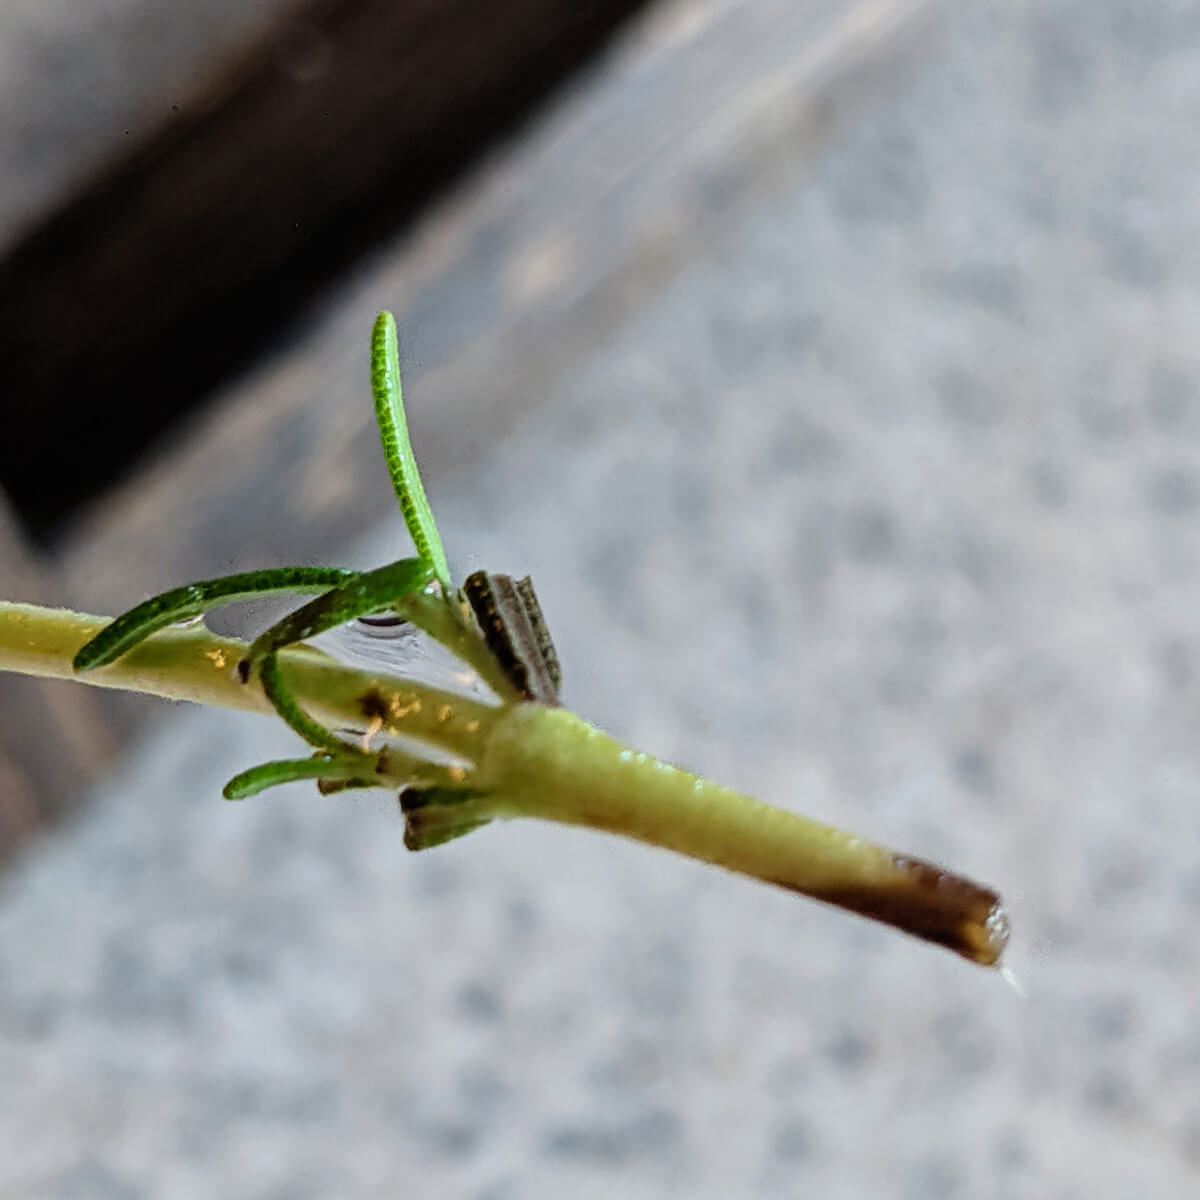 Tiny, hair-like root growing on the tip of a rosemary clipping during propagation efforts